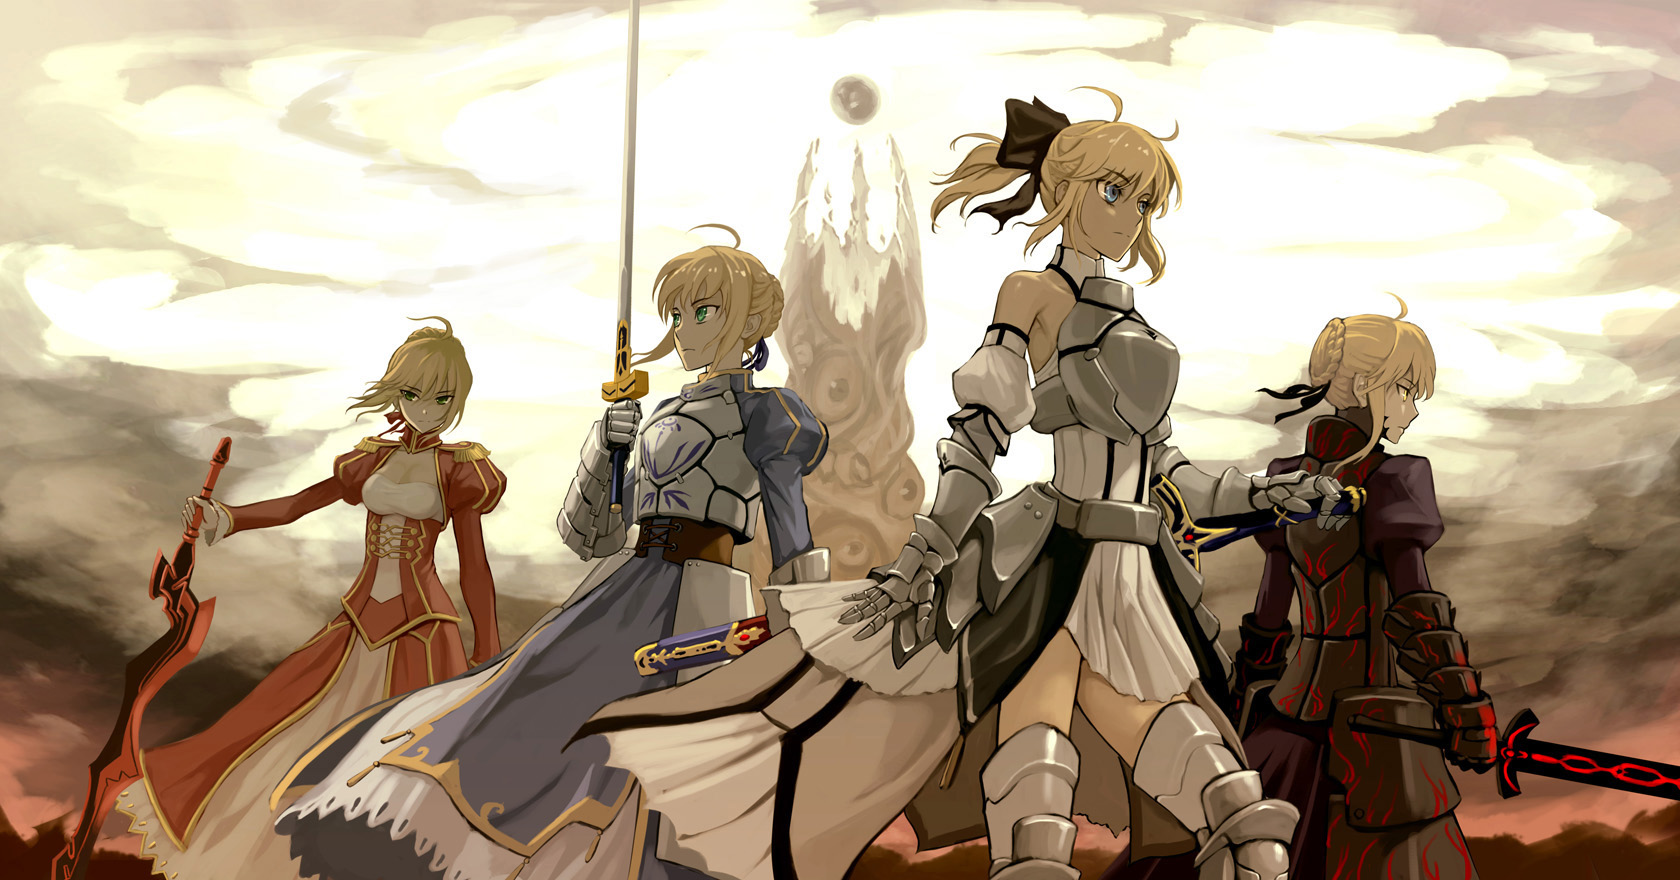 Lumia Anime/fate/stay Night Wallpaper Id - Saber Arthur Wallpaper Android -  1680x880 Wallpaper 